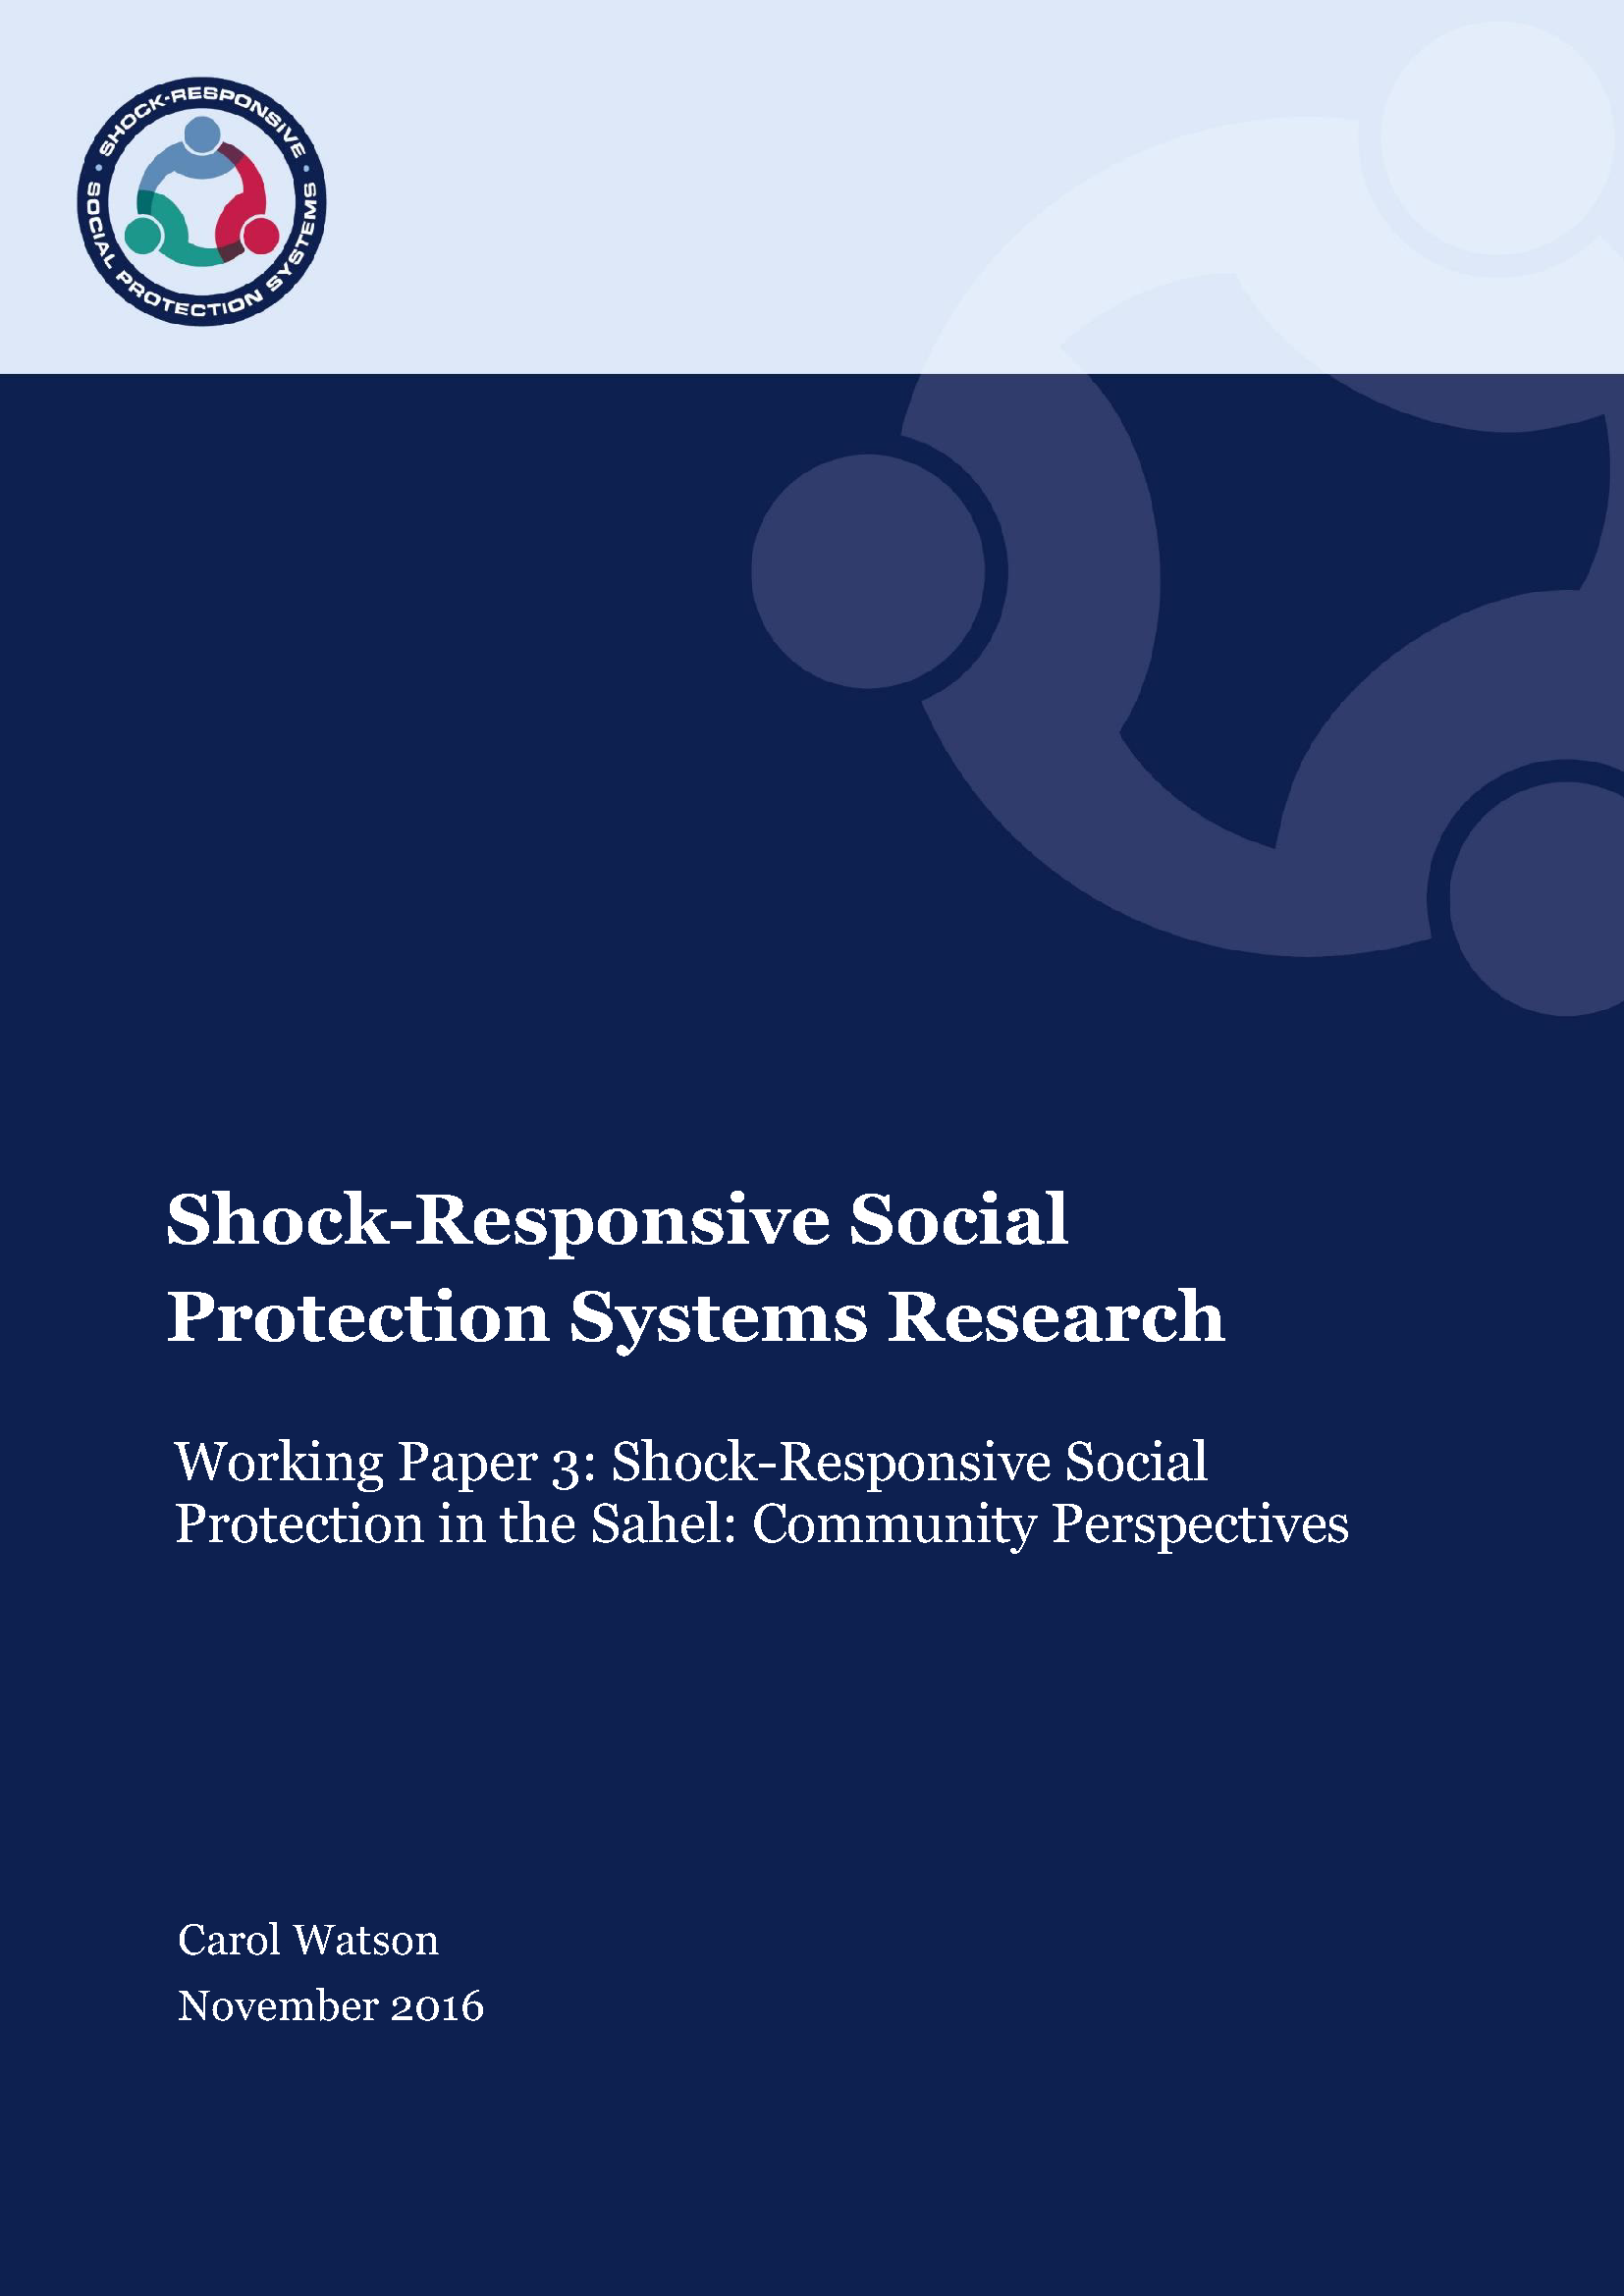 Cover page for Shock-Responsive Social Protection Systems Research Working Paper 3: Shock-Responsive Social Protection in the Sahel - Community Perspectives